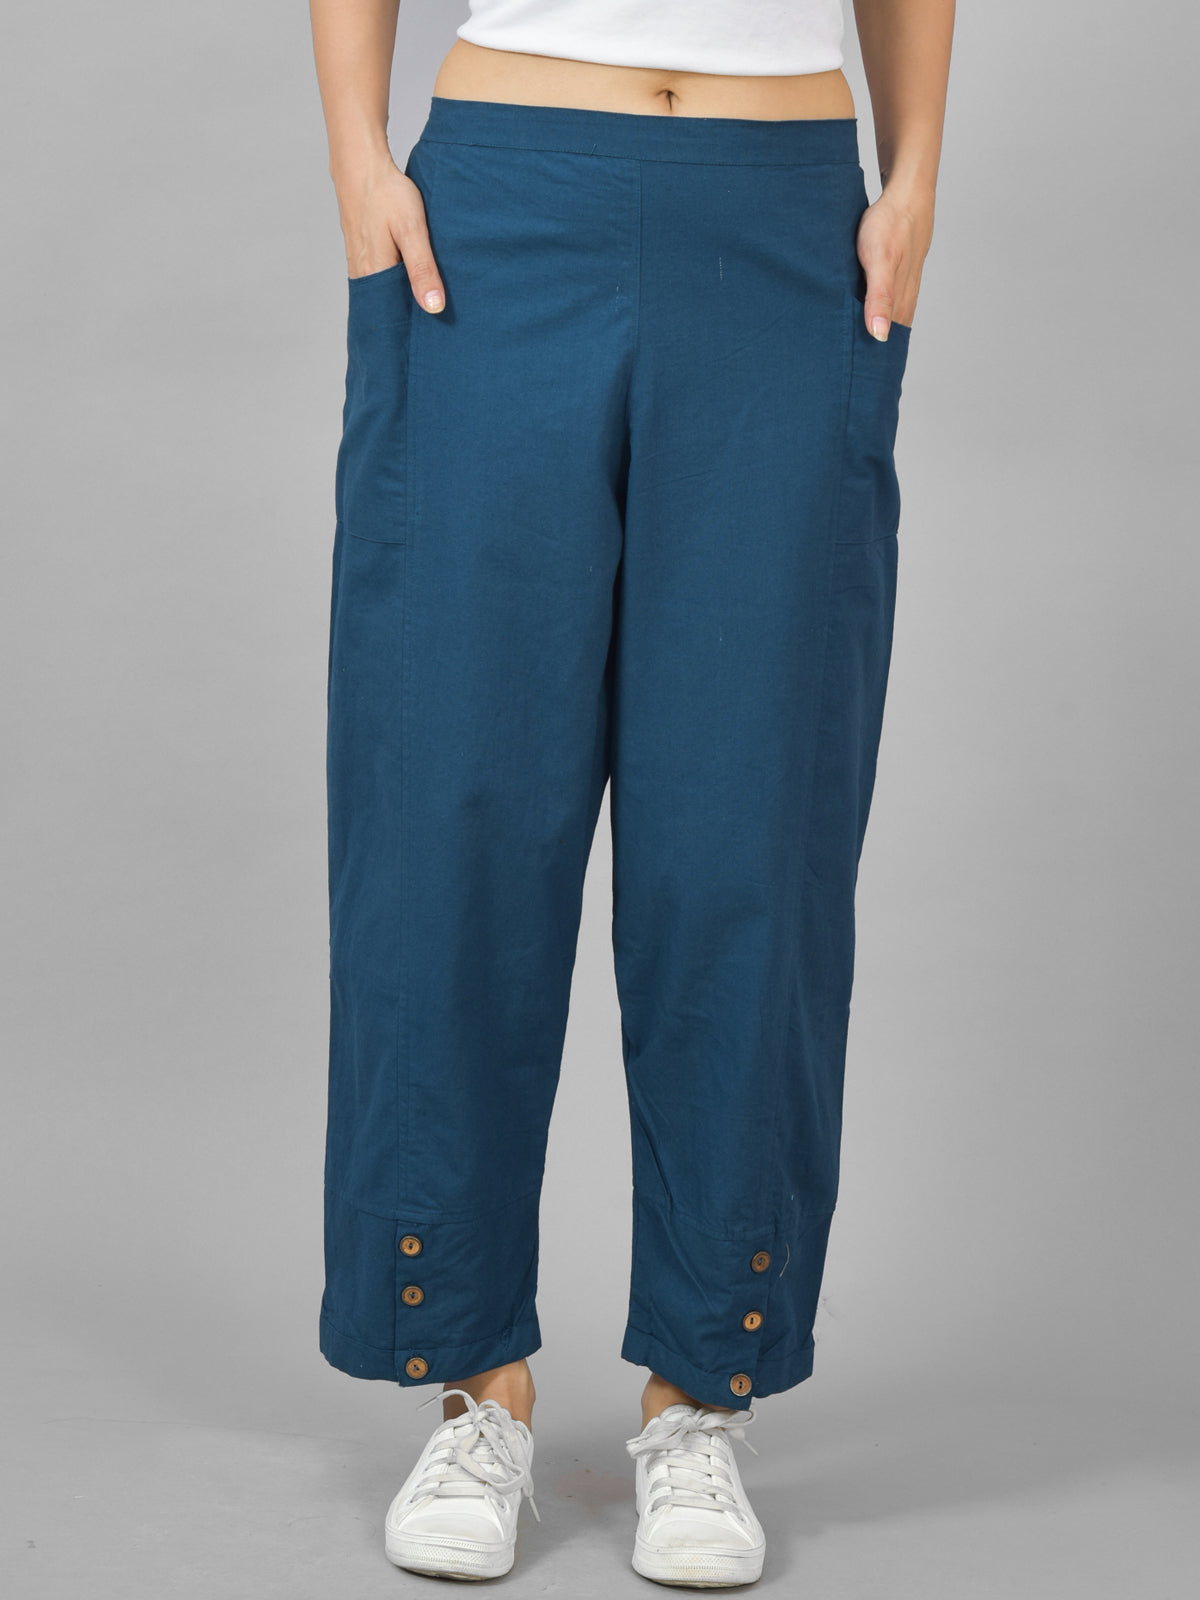 Combo Pack Of Womens Melange Grey And Teal Blue Side Pocket Straight Cargo Pants